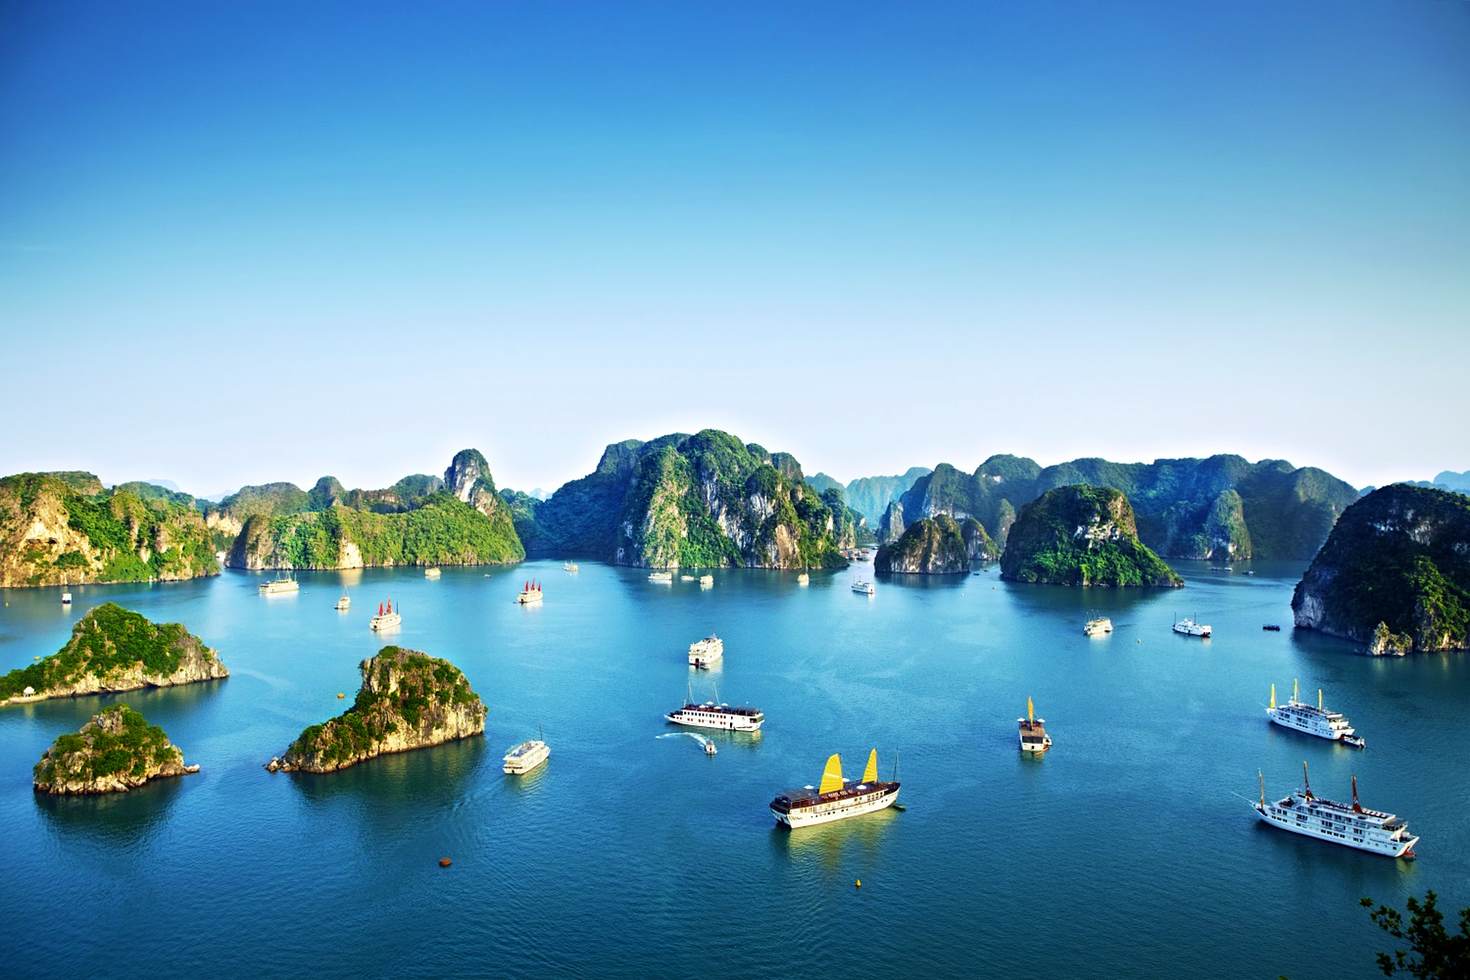 The marvelous Halong Bay waits for your exploring